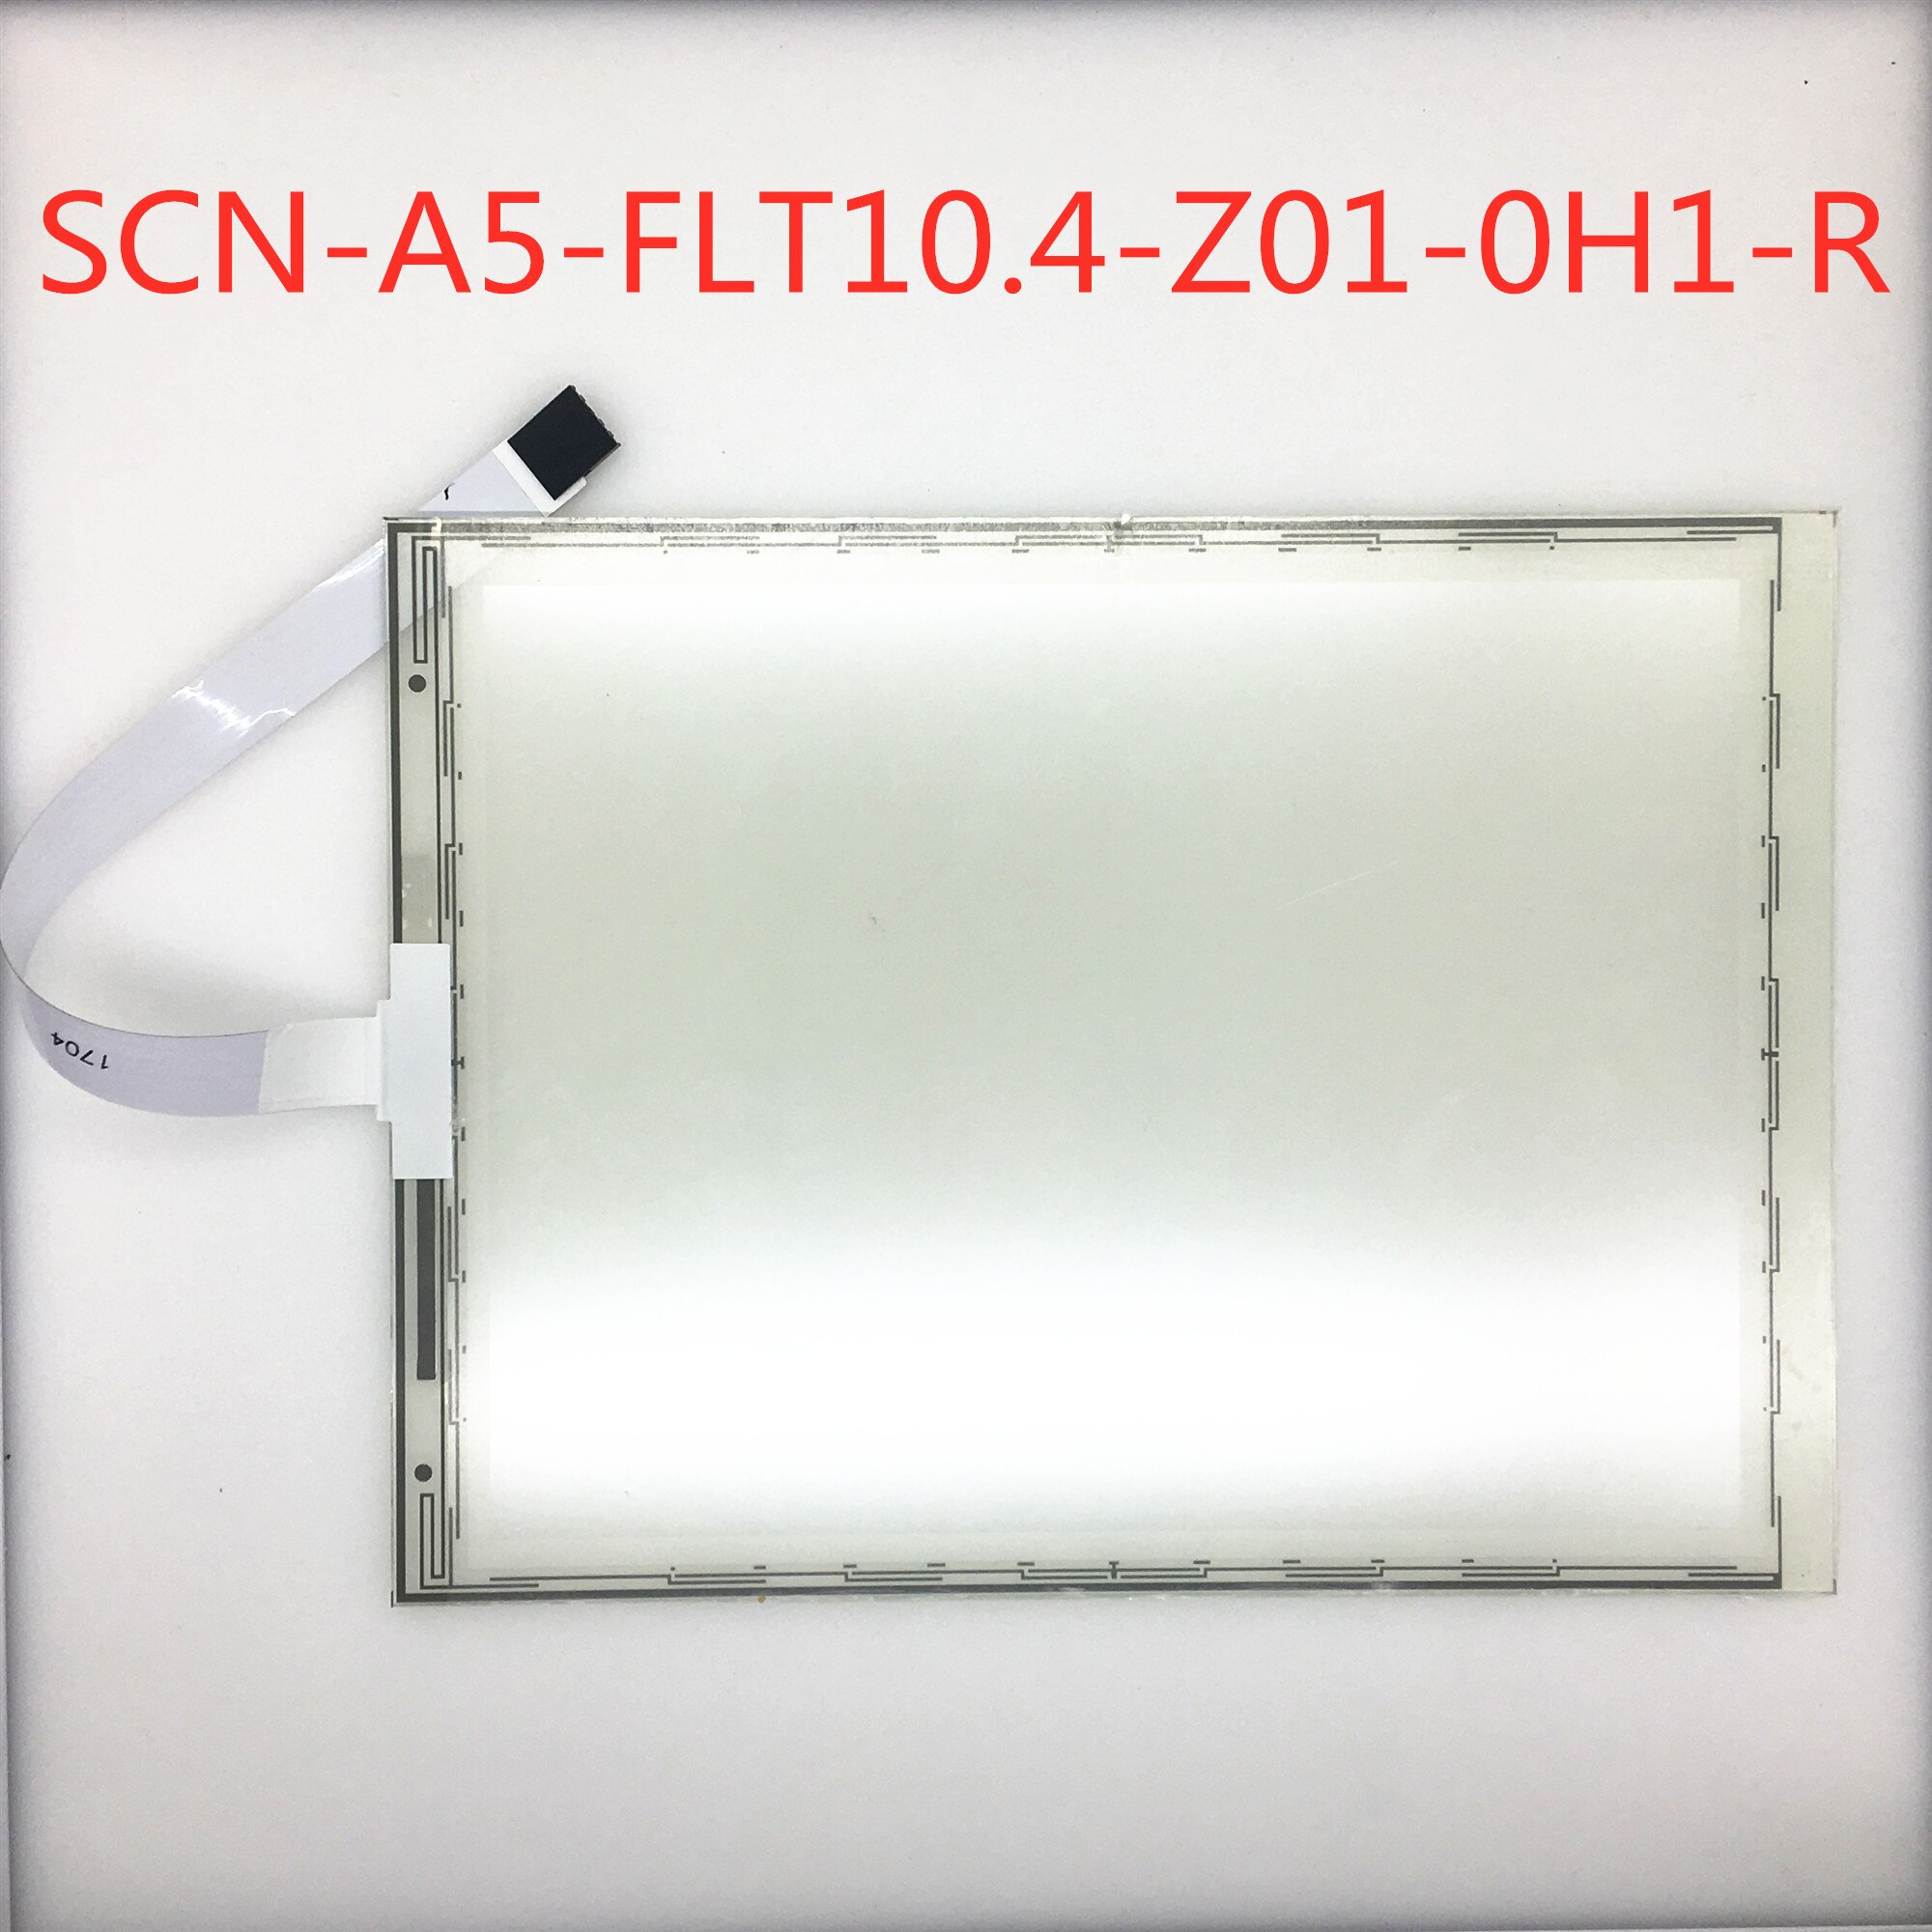 Elo touch  e458225 10.4 touchpad scn -a5- flt 10.4-z01-0 h 1- r